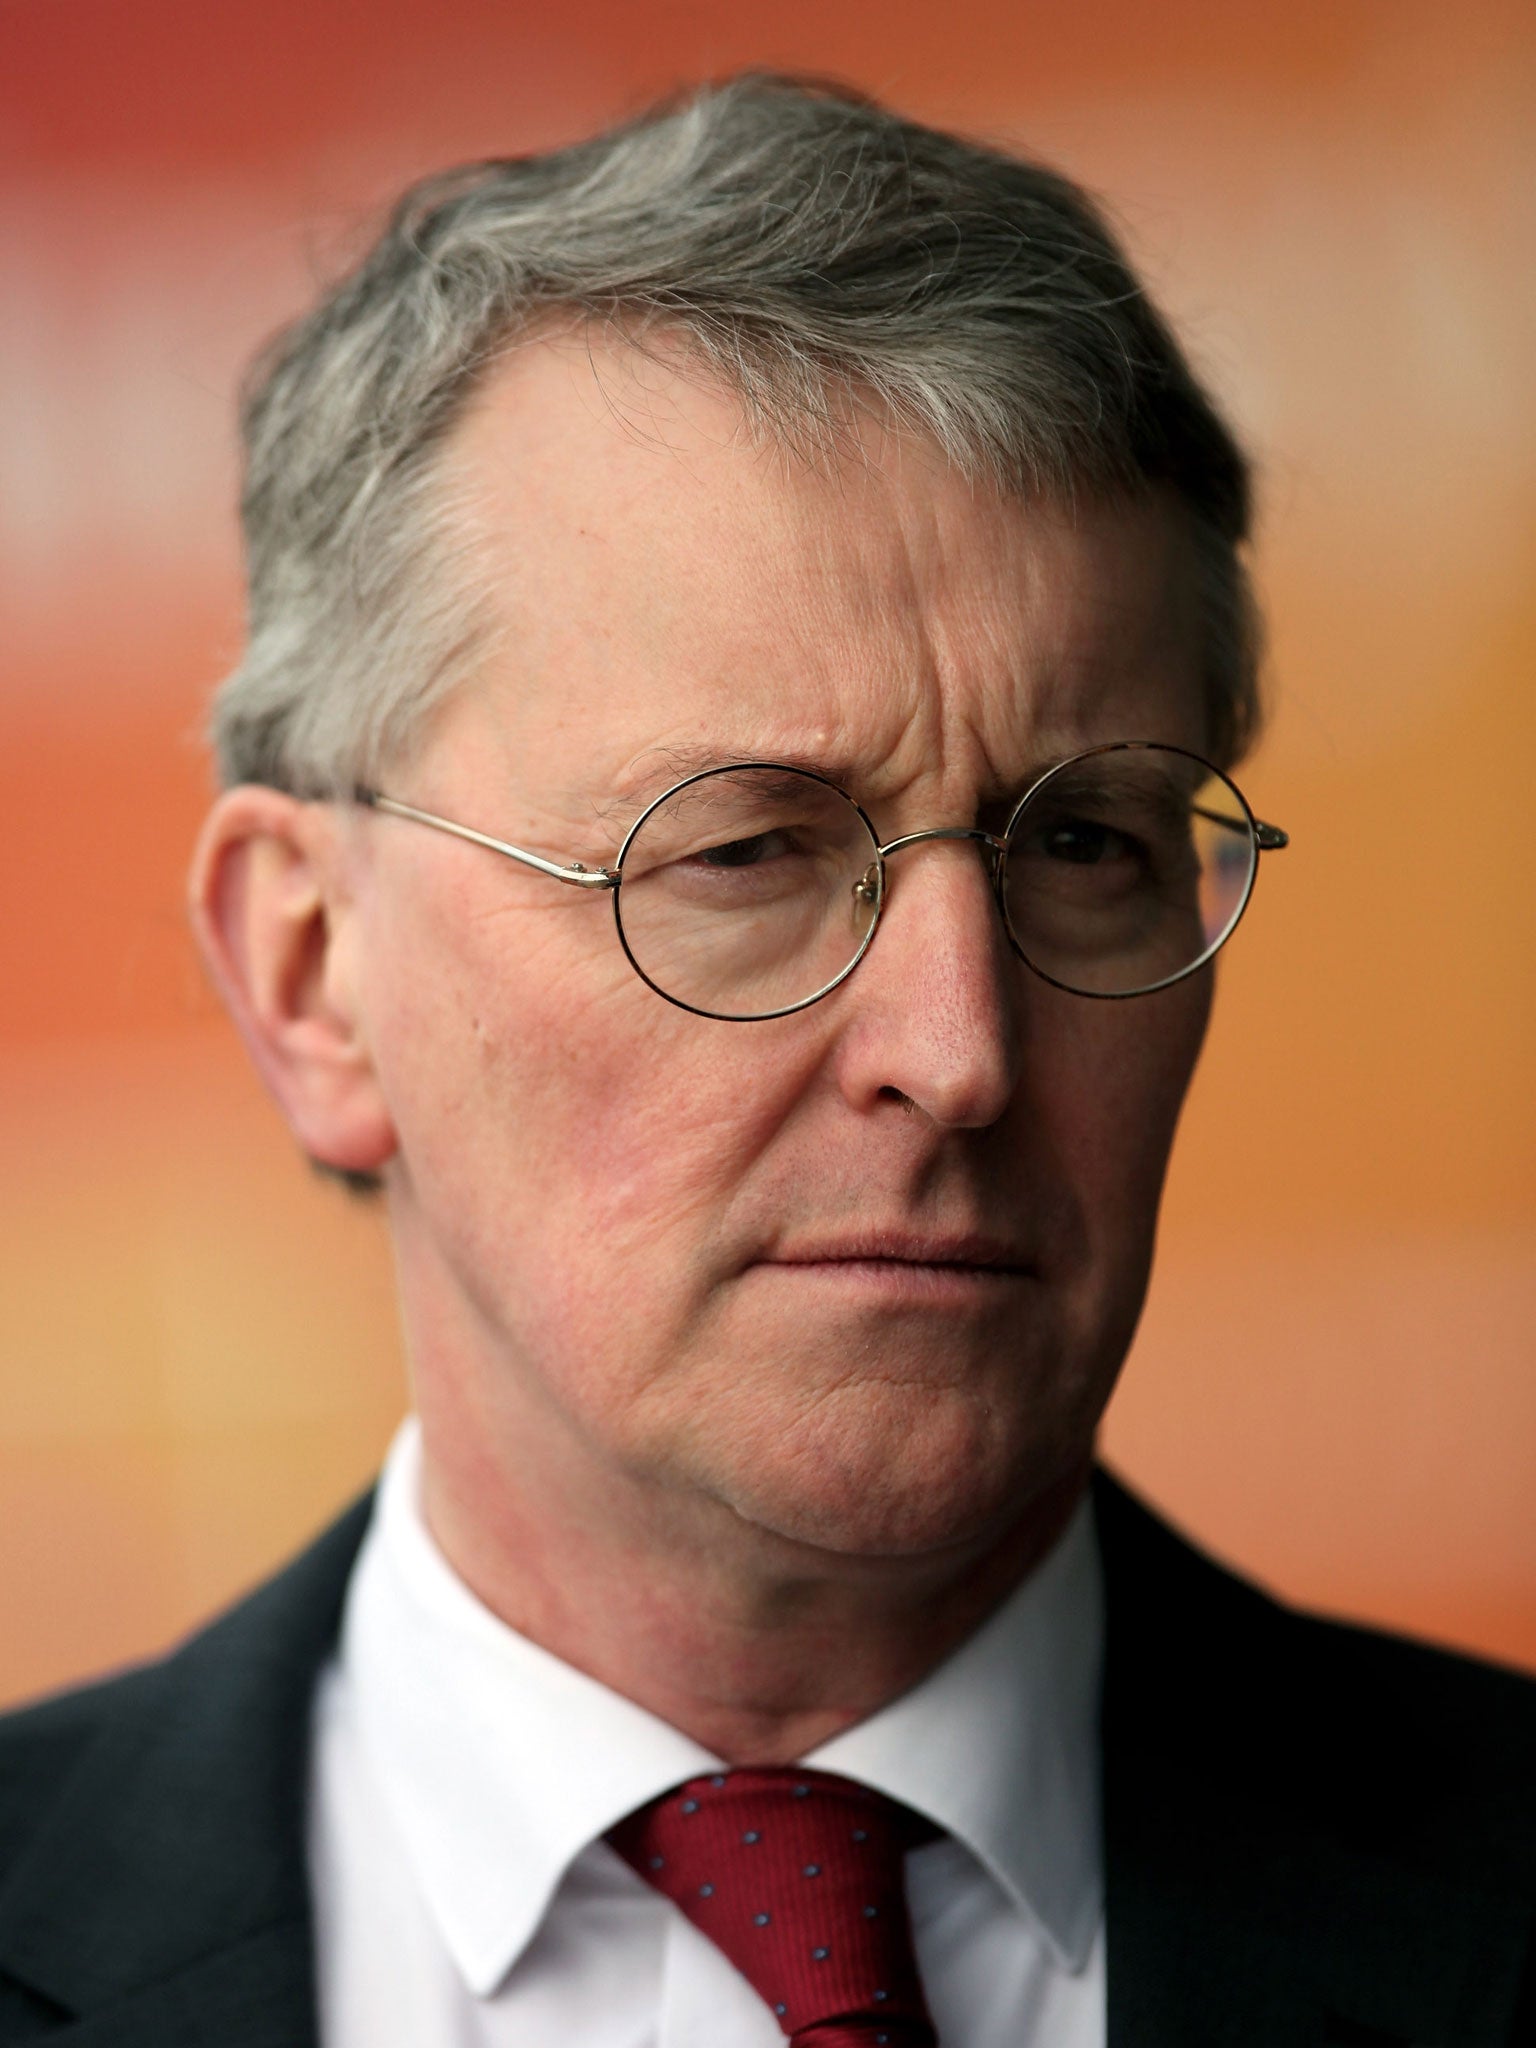 Hilary Benn, the shadow Communities Secretary said: “All over the country, people on very low incomes will be asked to pay sums of money they simply cannot afford, just like the hated poll tax.”